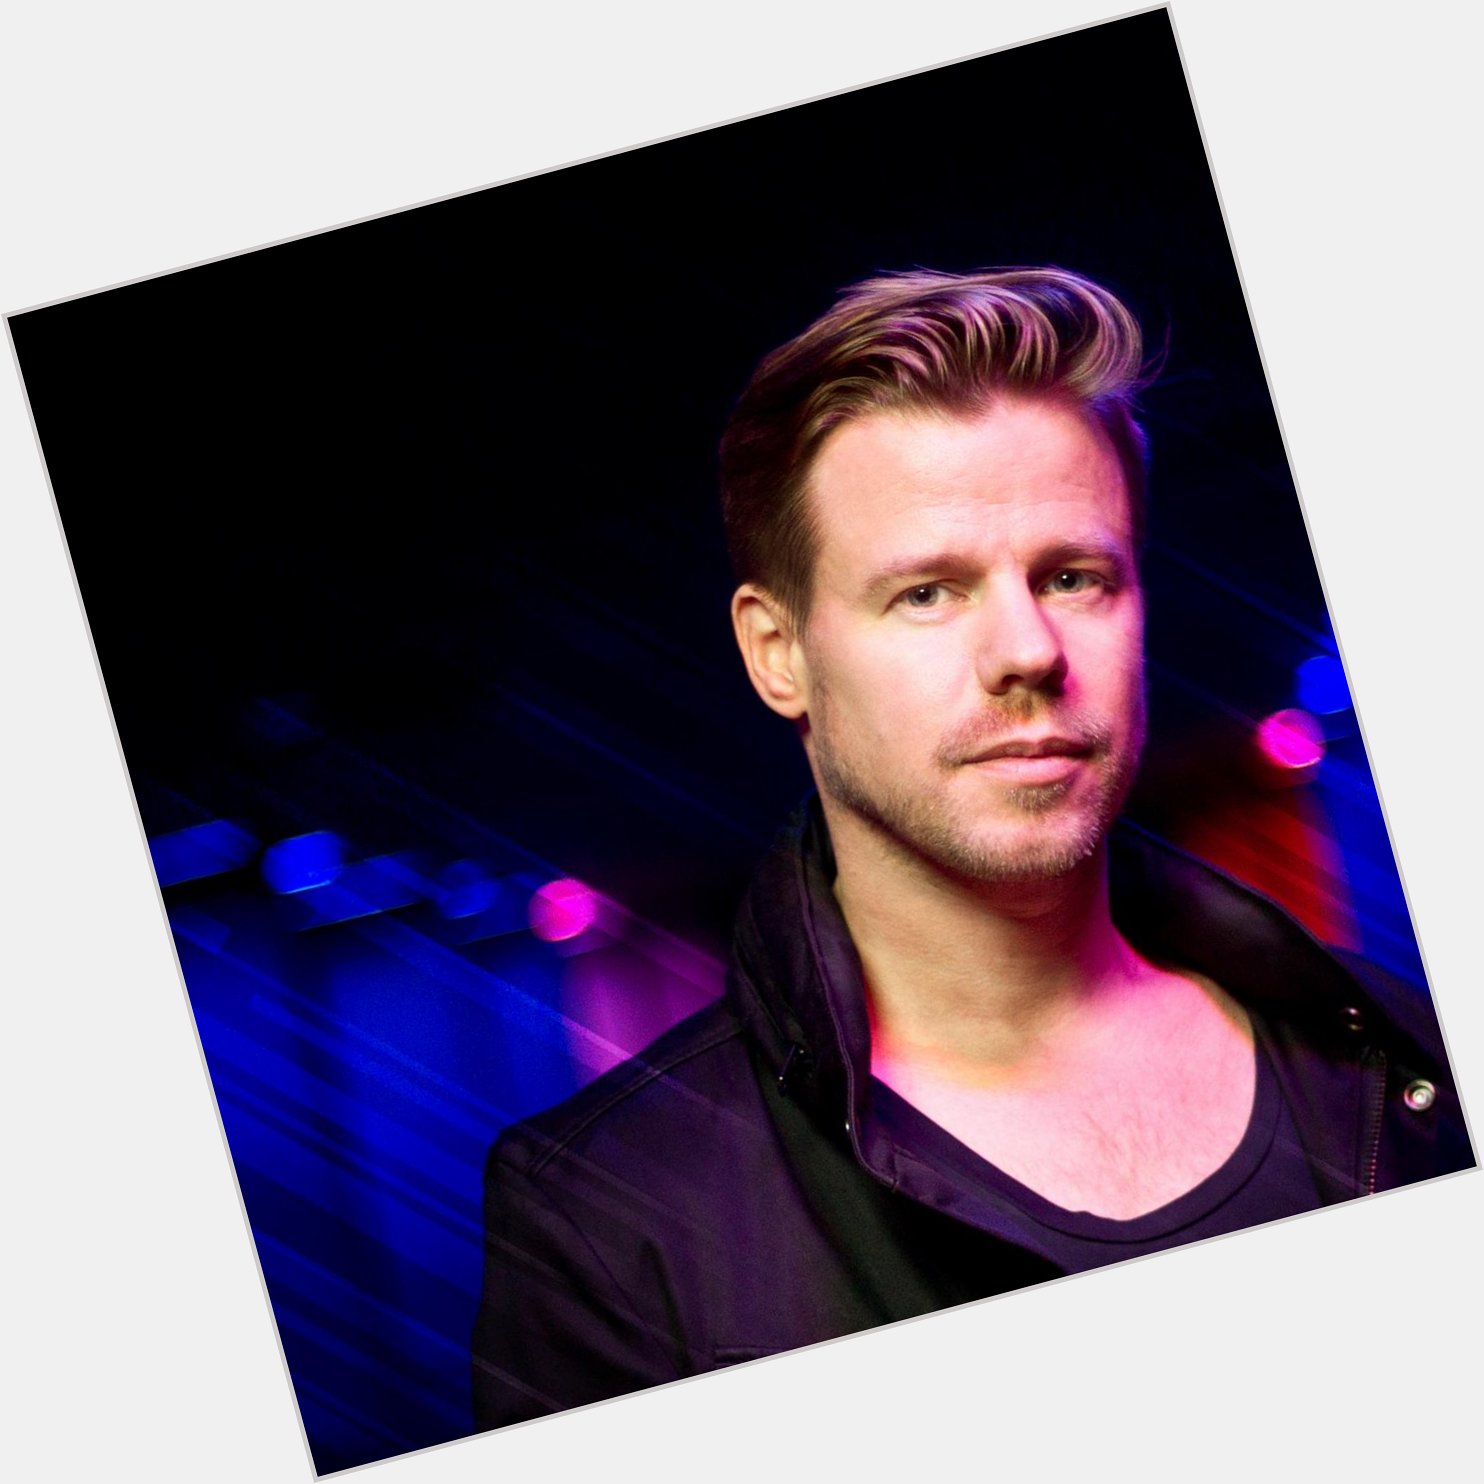 Wishing a very happy birthday to the legend Ferry Corsten from all the Alter Ego Music family 